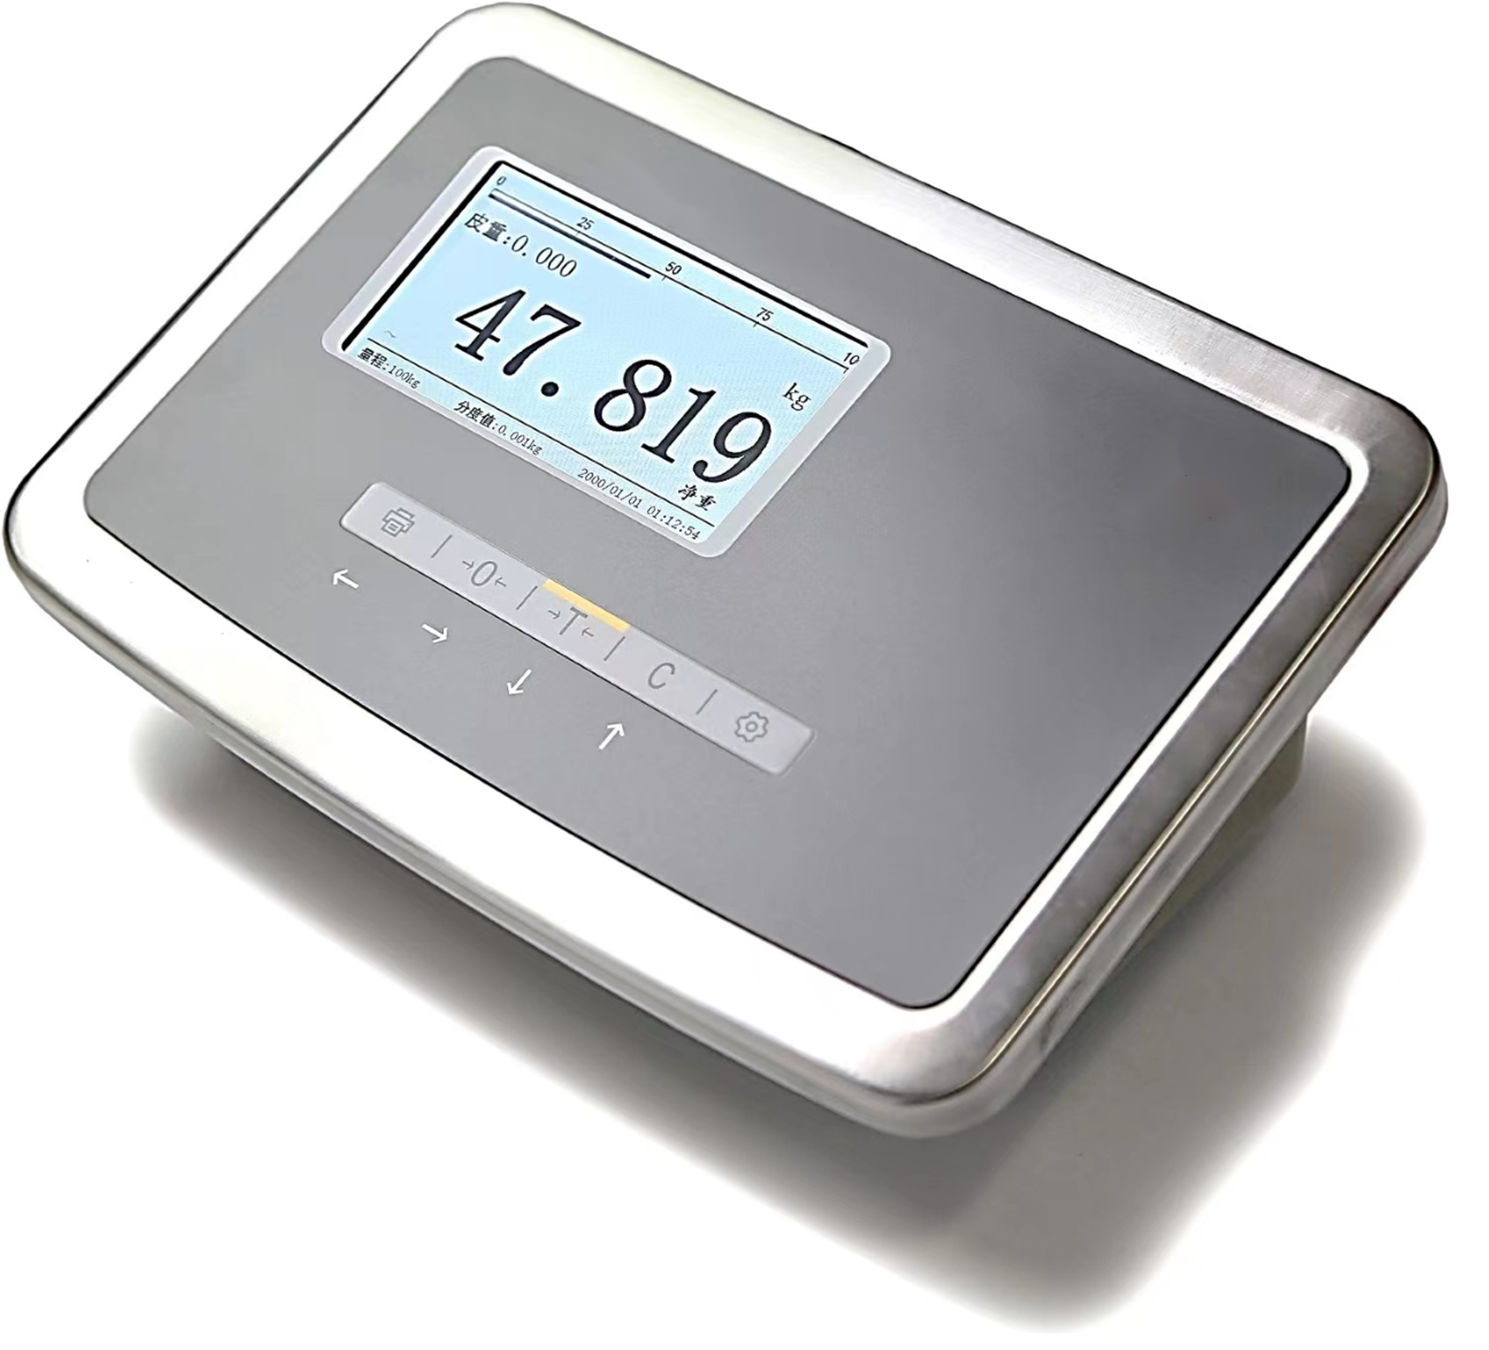 New Product Alert: Introduction of Weighing Display